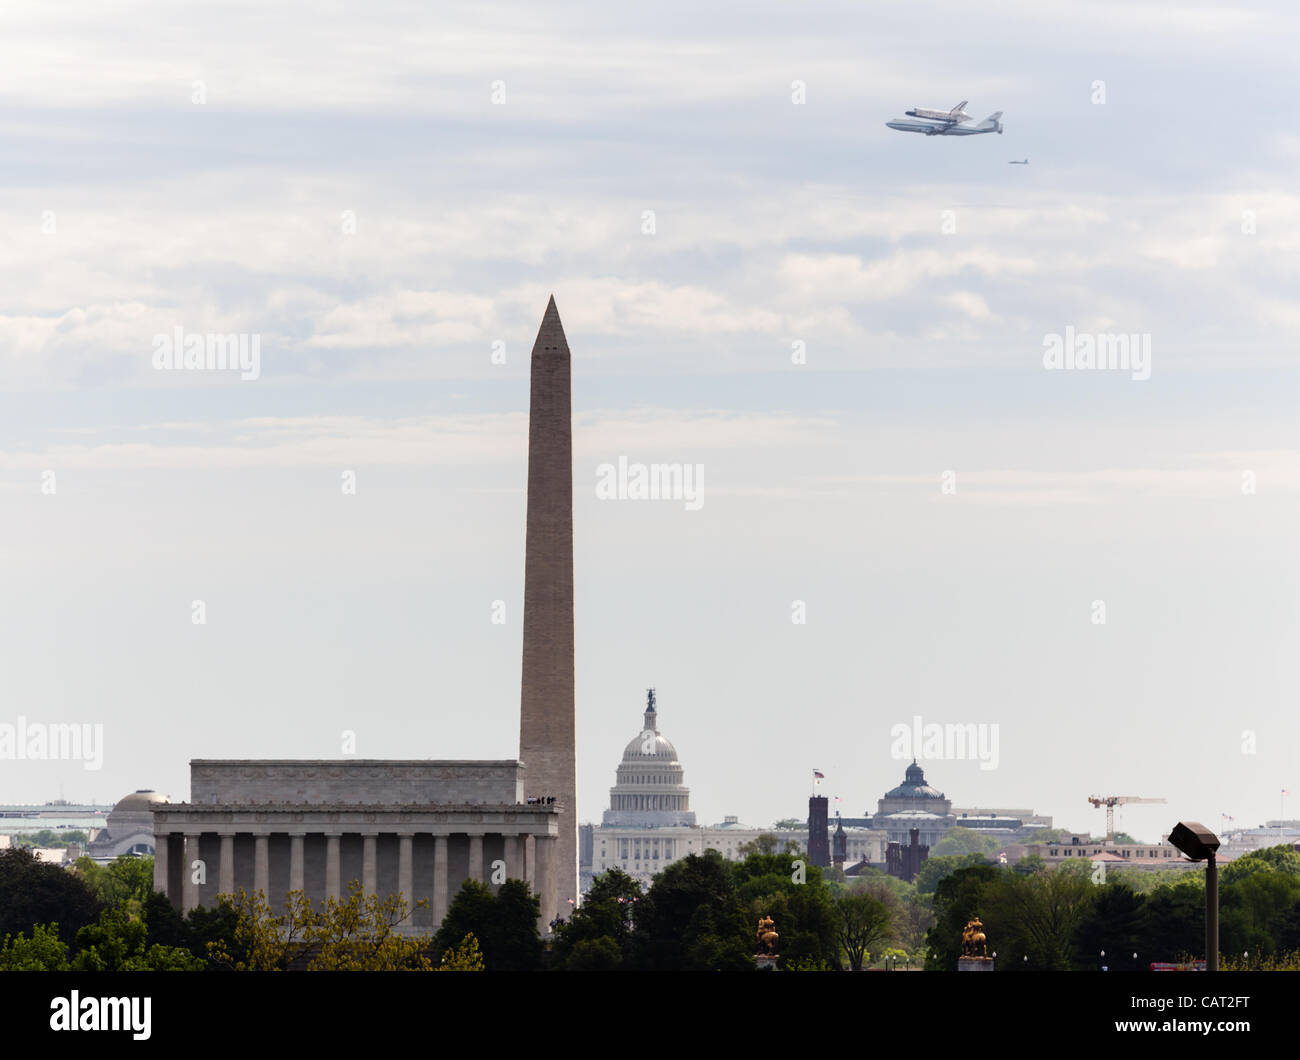 WASHINGTON DC - APRIL 17: Space Shuttle Discovery flies over Washington DC on April 17, 2012 on route to its final resting place in the Air and Space Museum Stock Photo